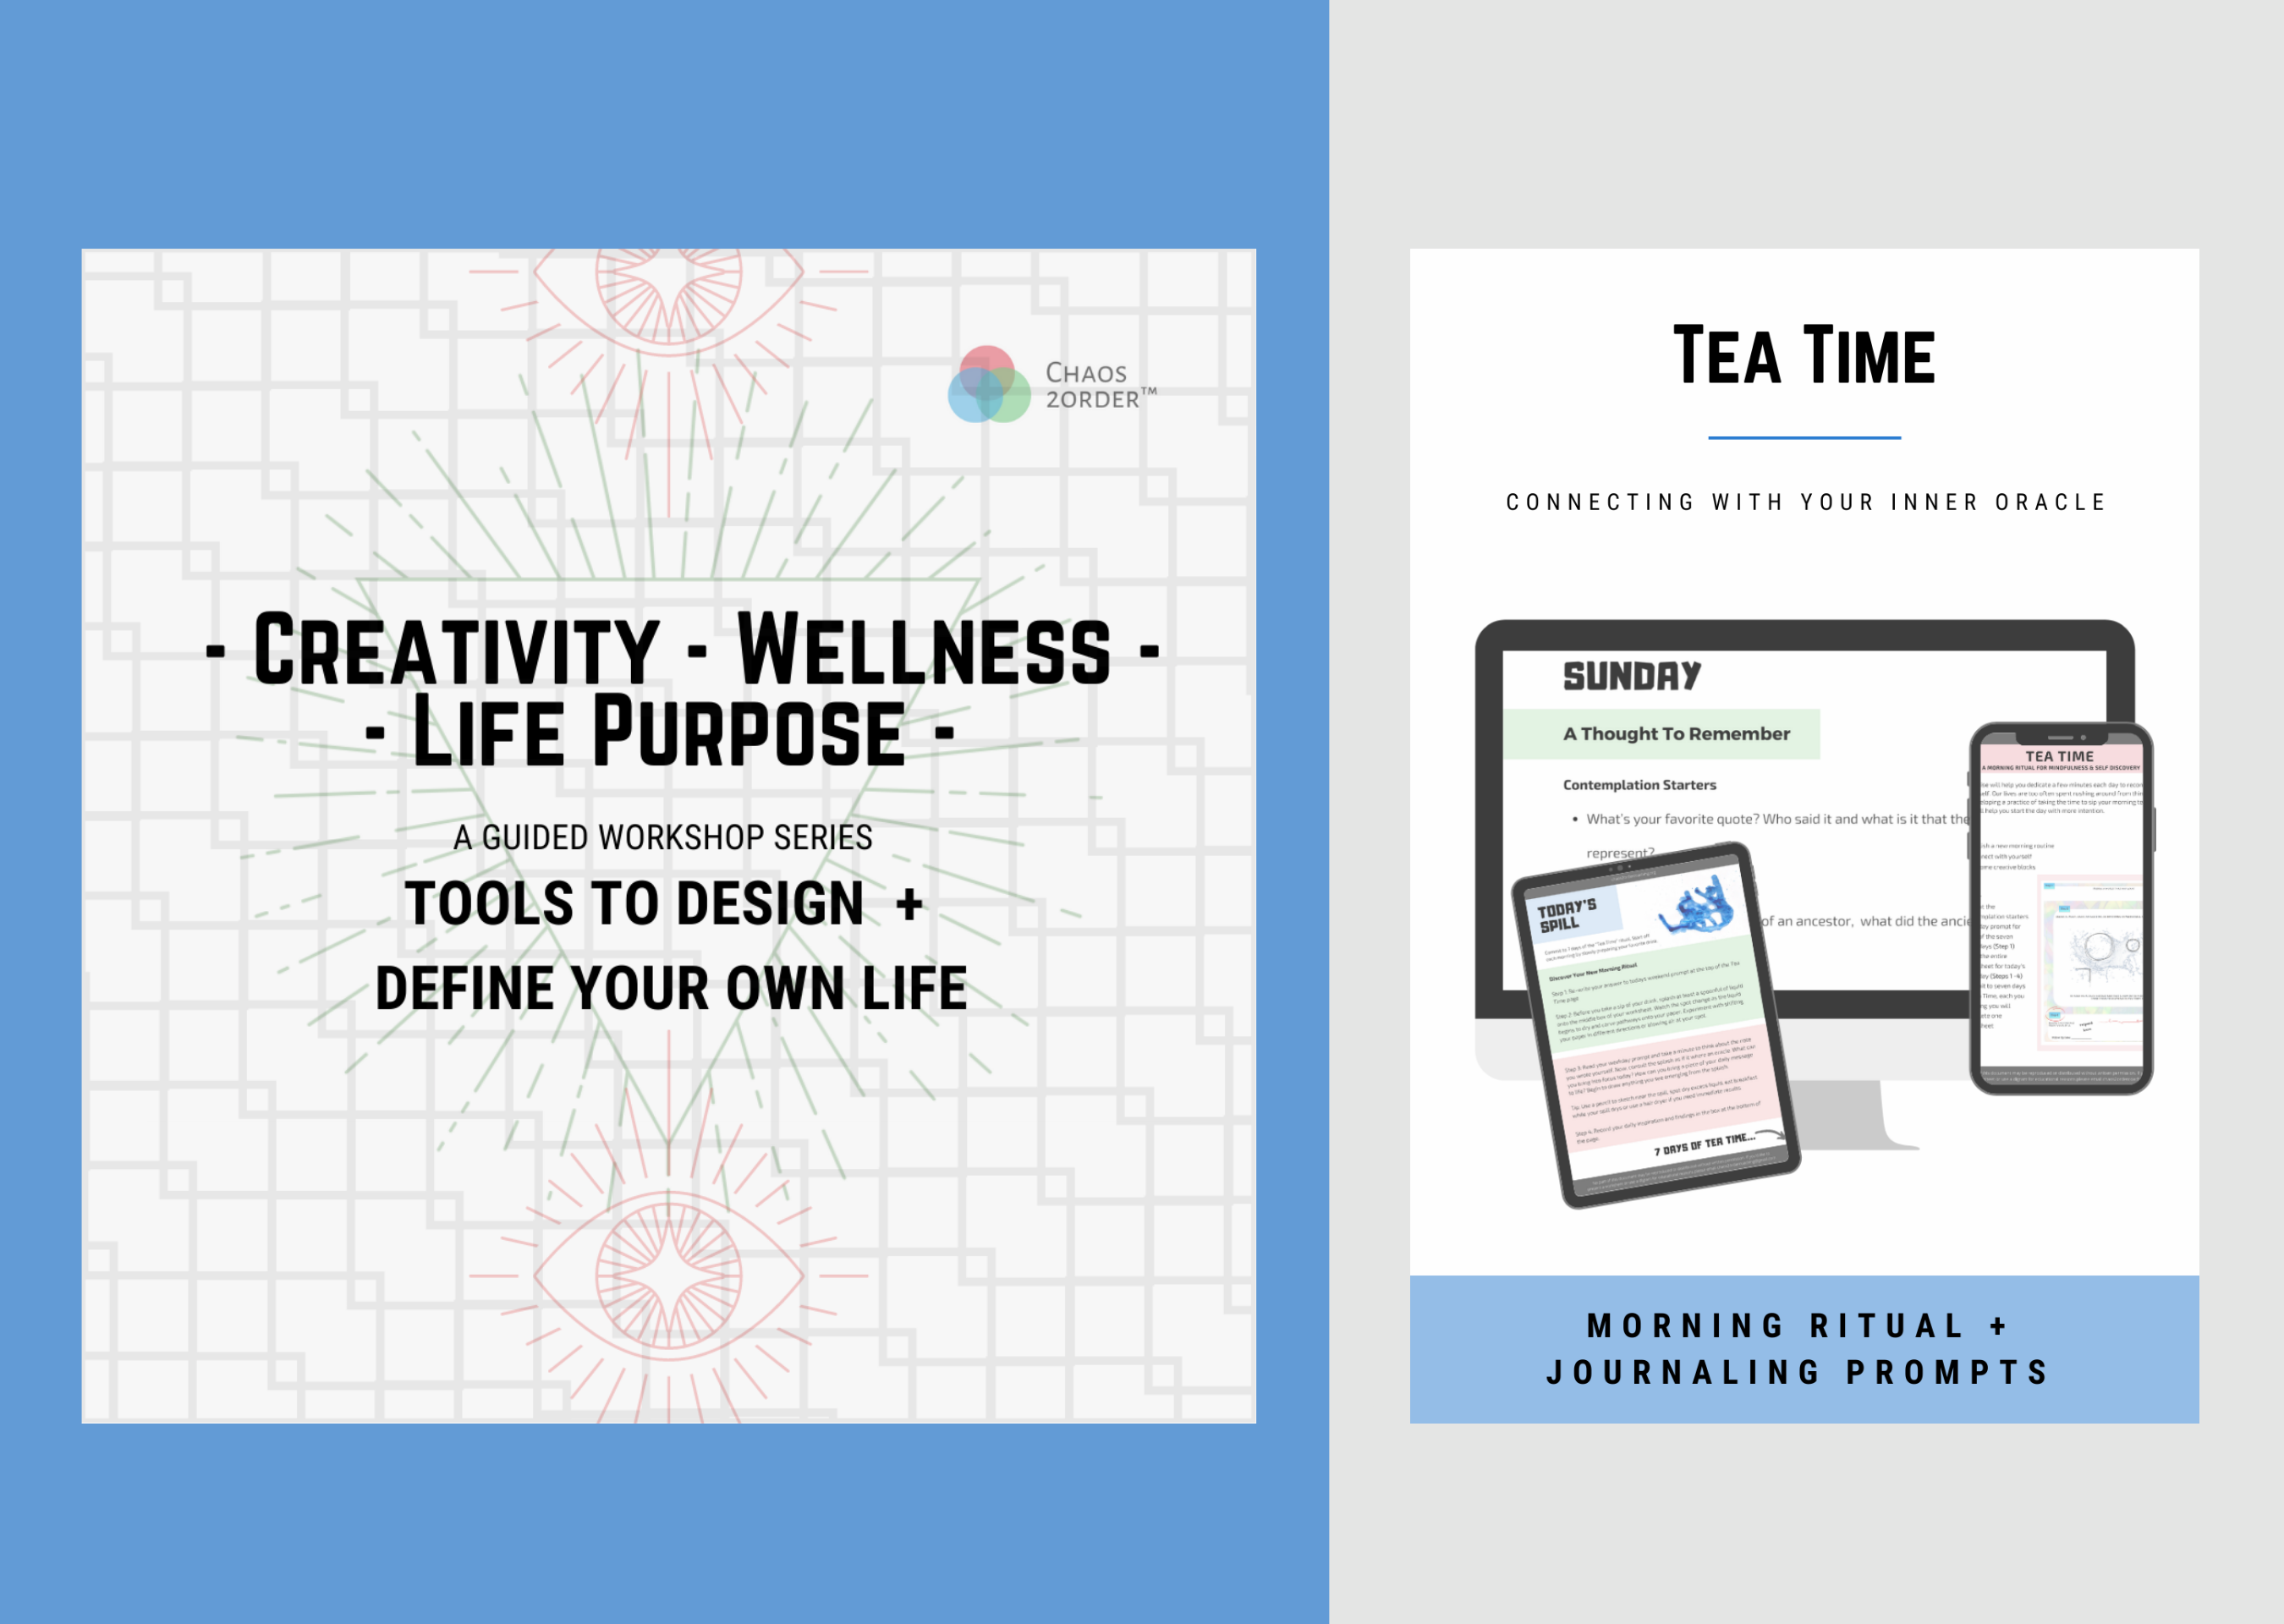 Creativity - Wellness - Life Purpose - Guided Workshop Series, Tea Time, A Morning Ritual to Connect To Intuition